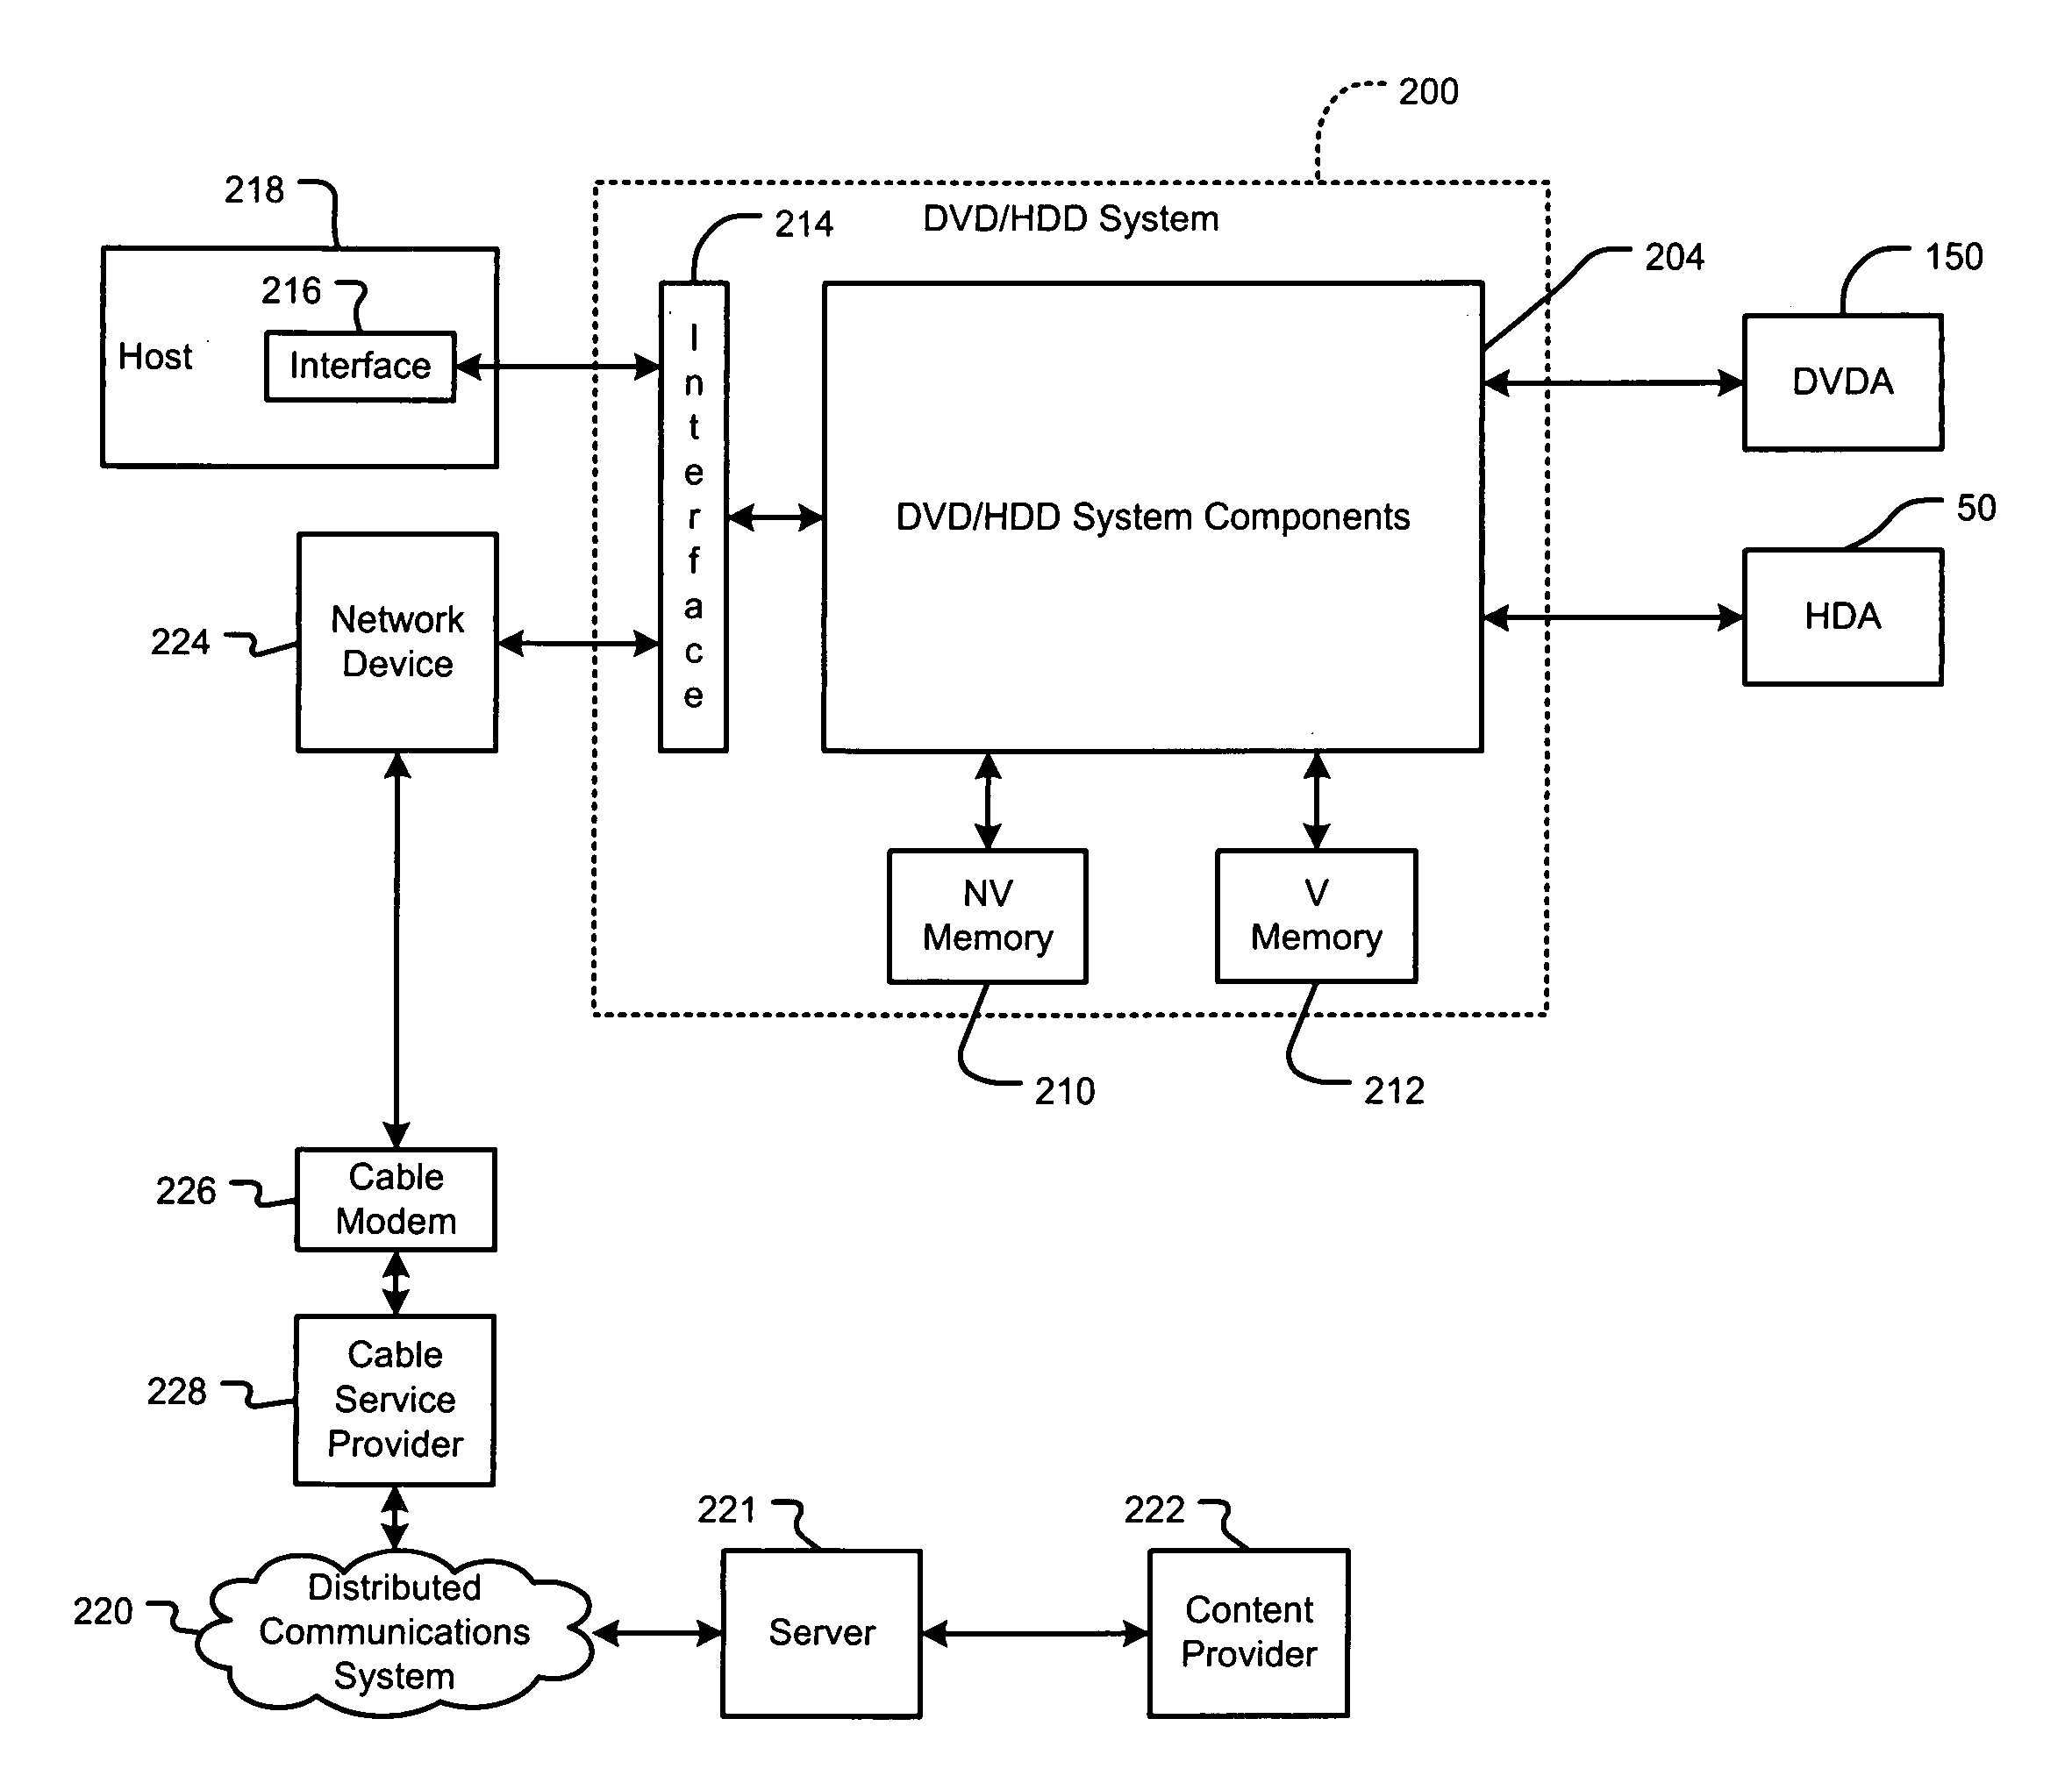 Unified control and memory for a combined DVD/HDD system